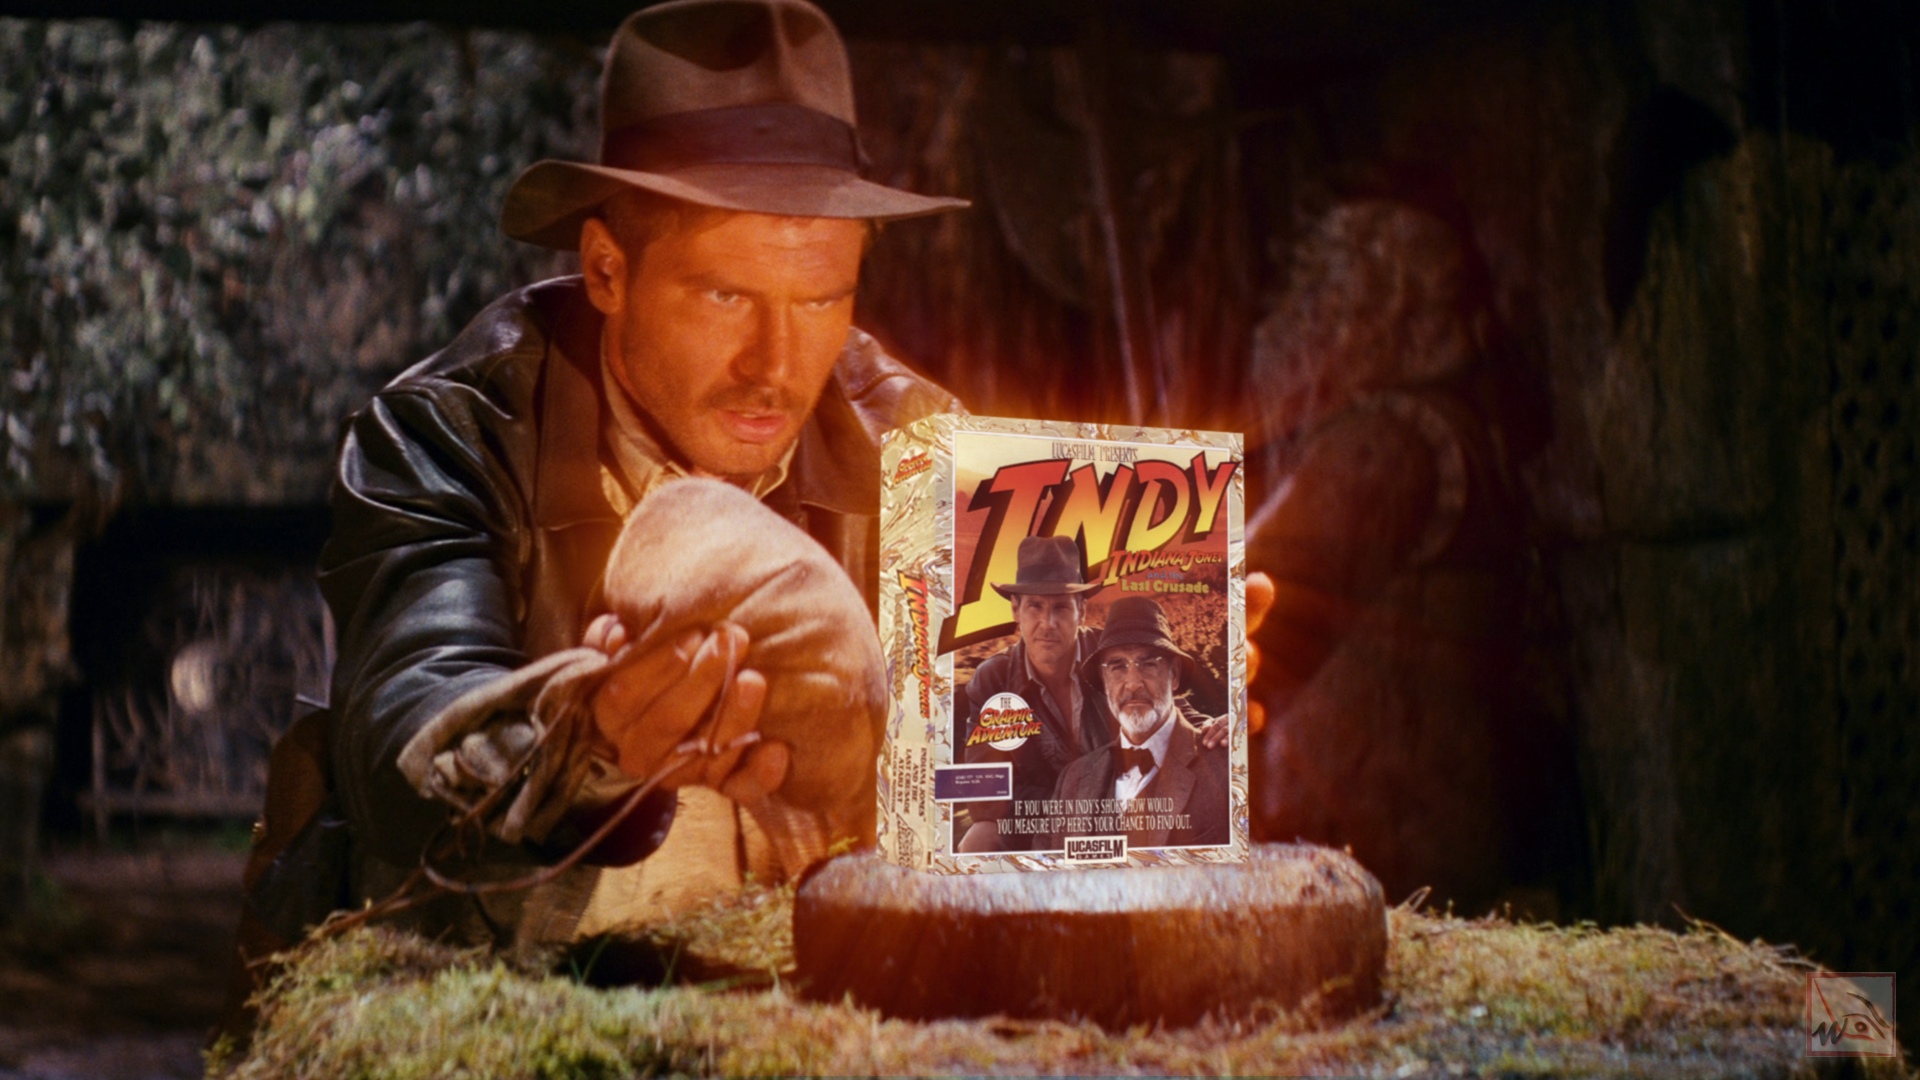 Indiana Jones and the Last Crusade   The Graphic Adventure from